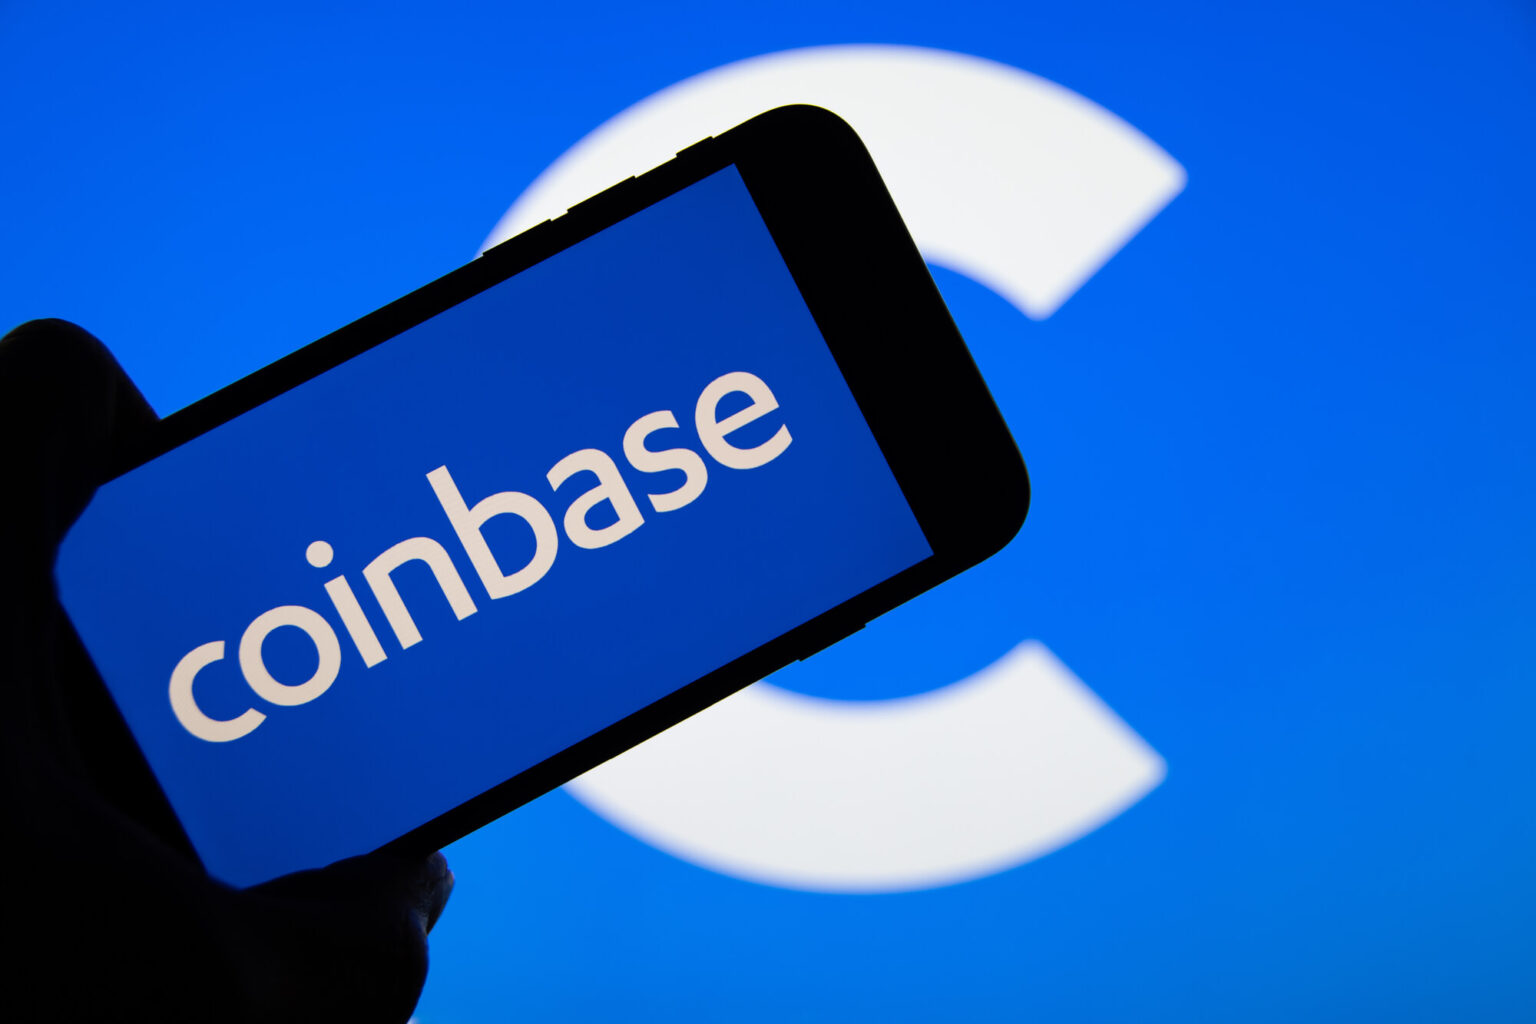 Coinbase launches its own Ethereum Layer 2 platform "Base"